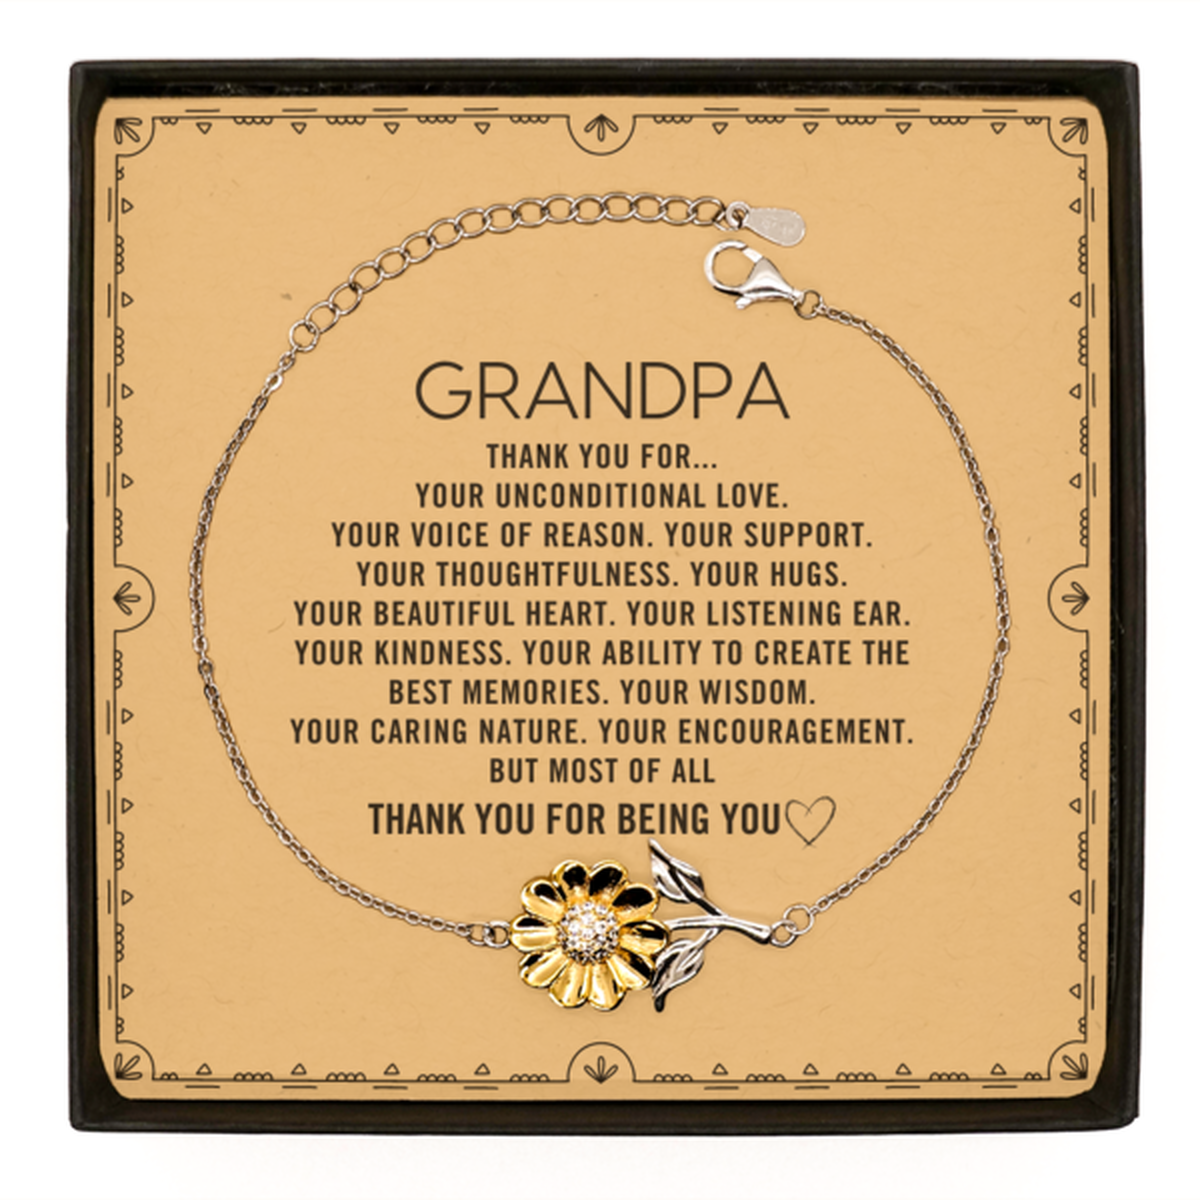 Grandpa Sunflower Bracelet Custom, Message Card Gifts For Grandpa Christmas Graduation Birthday Gifts for Men Women Grandpa Thank you for Your unconditional love